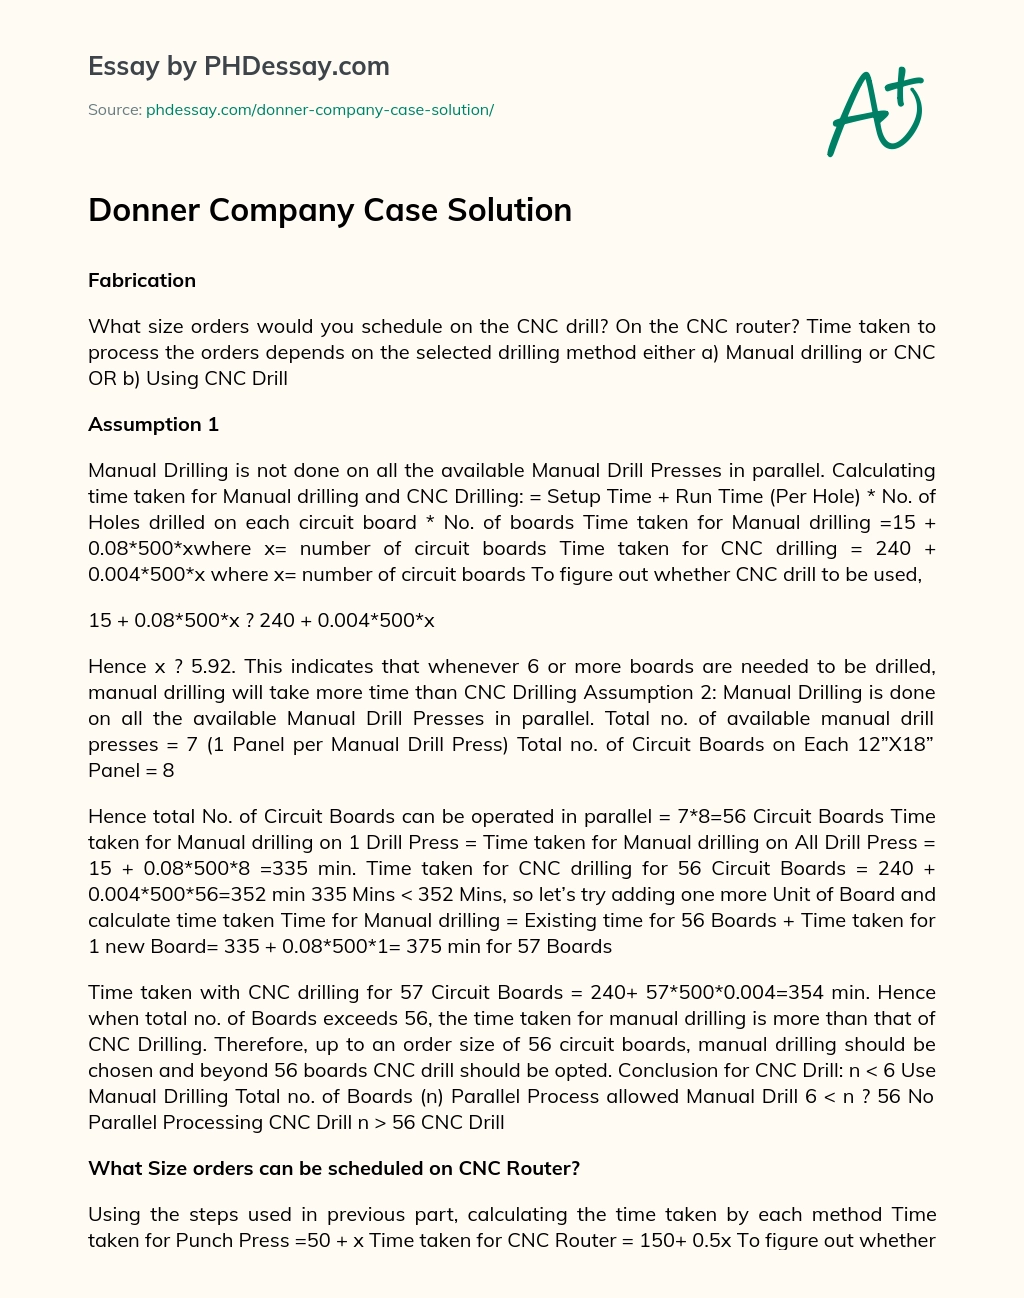 Donner Company Case Solution essay